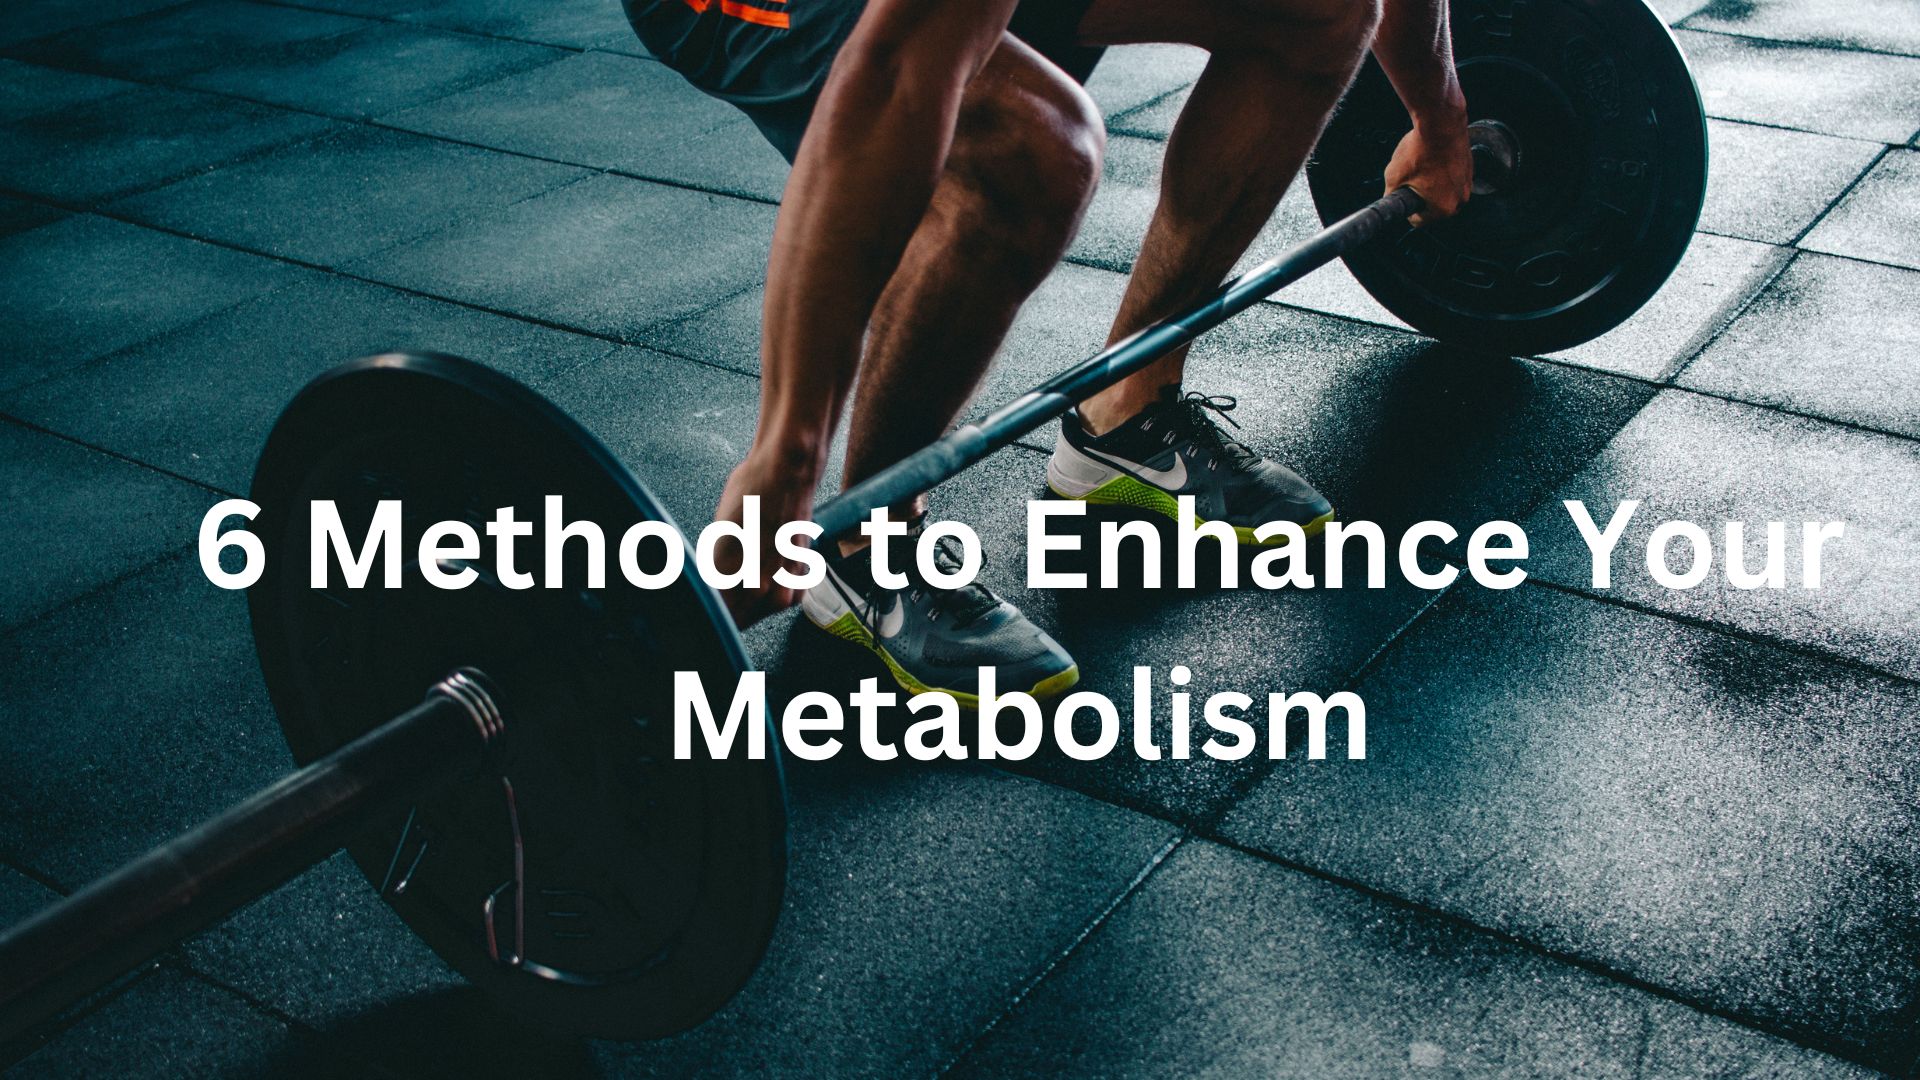 6 Methods to Enhance Your Metabolism